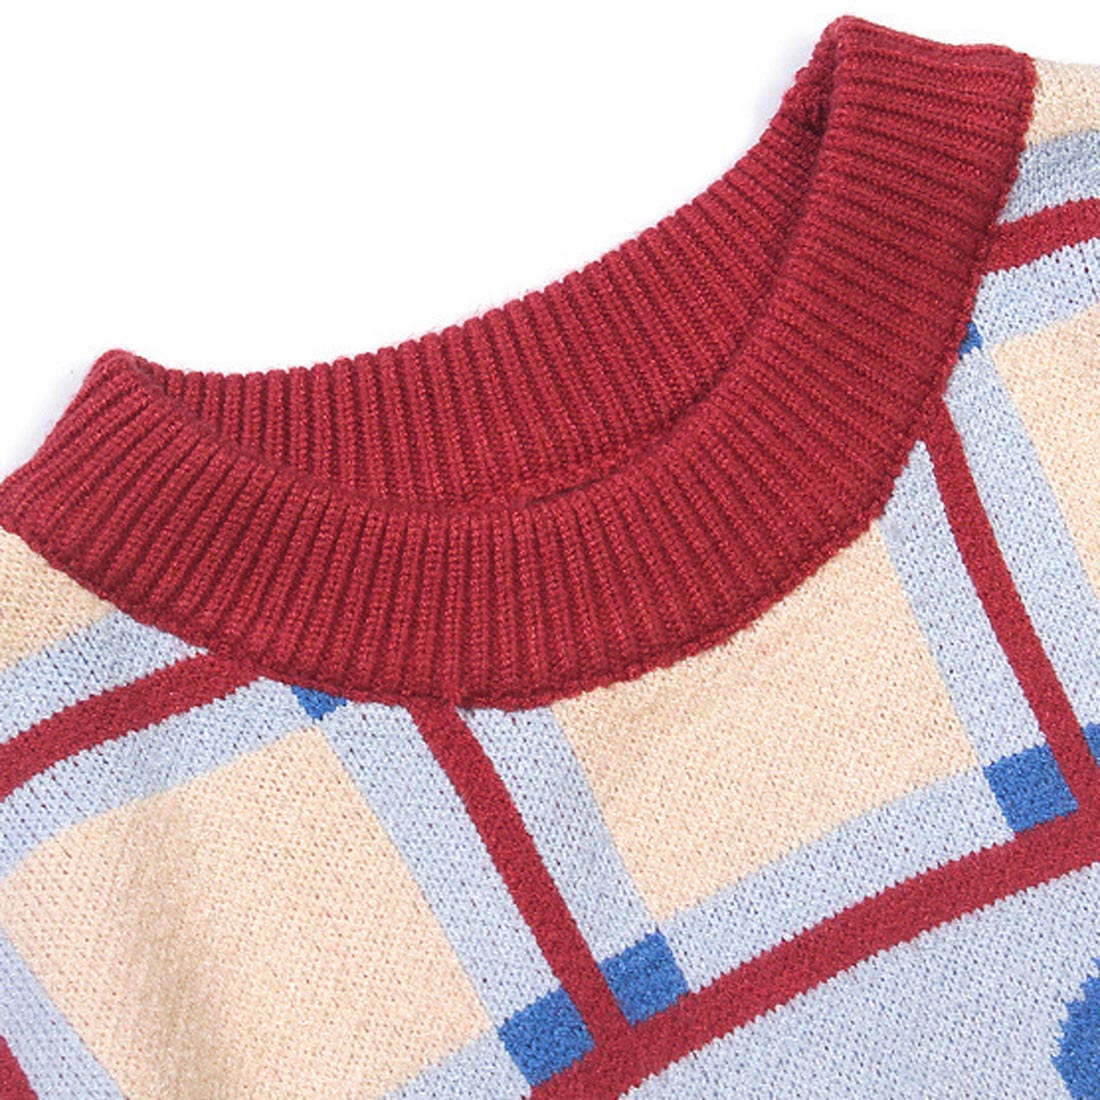 CAT CASE KNITTED SWEATER